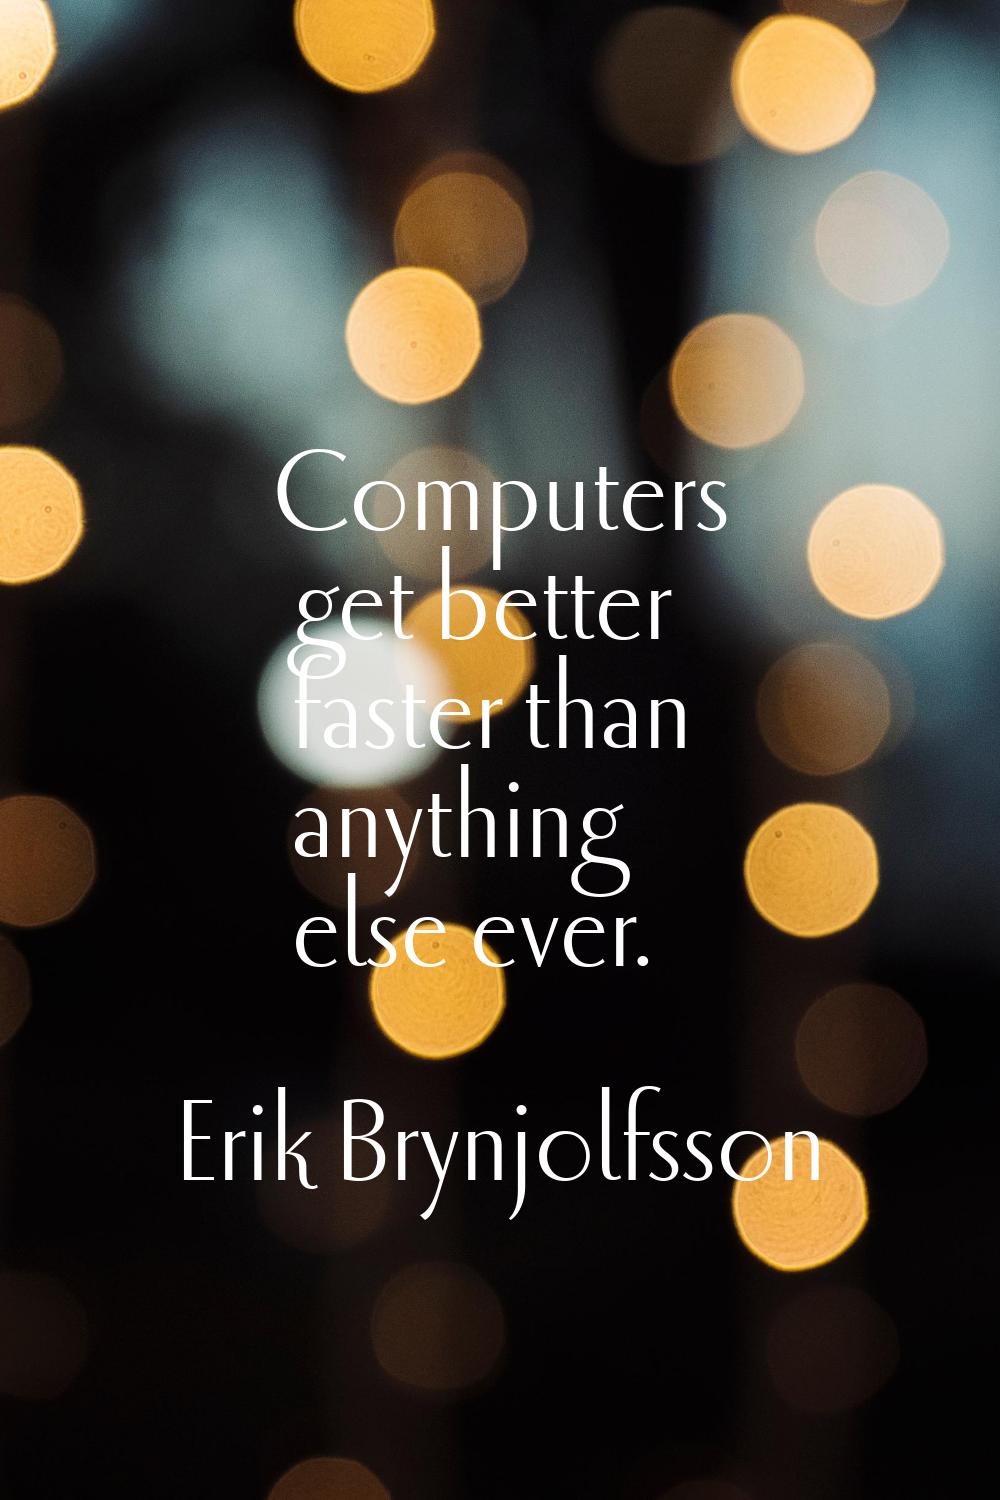 Computers get better faster than anything else ever.